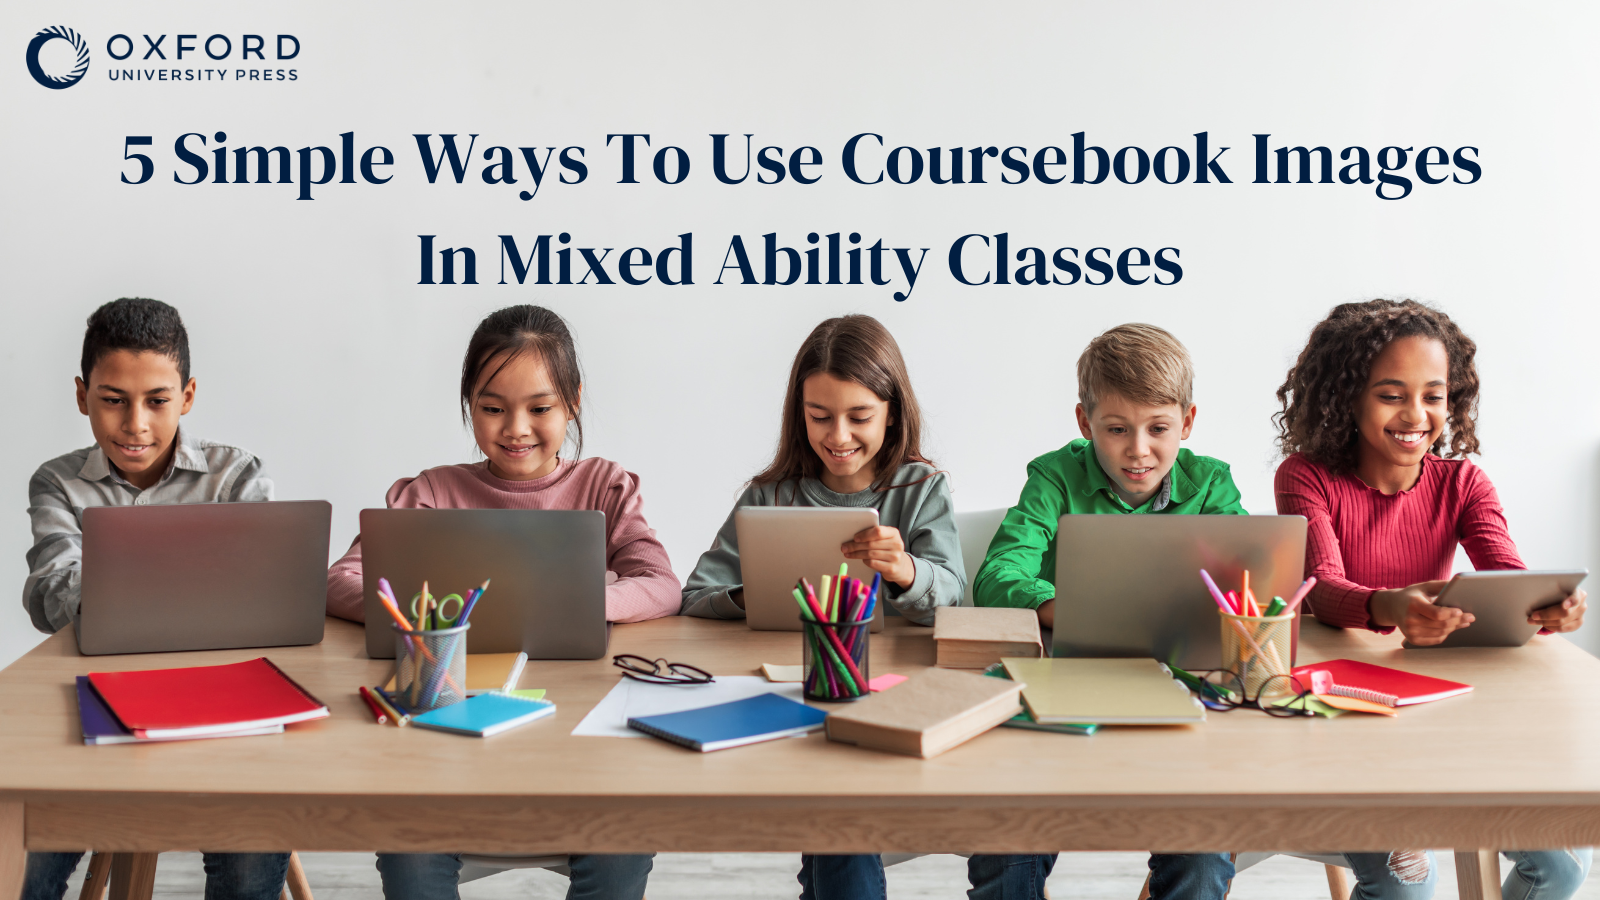 5 Simple Ways To Use Coursebook Images In Mixed Ability Classes: students at a desk looking at tablets